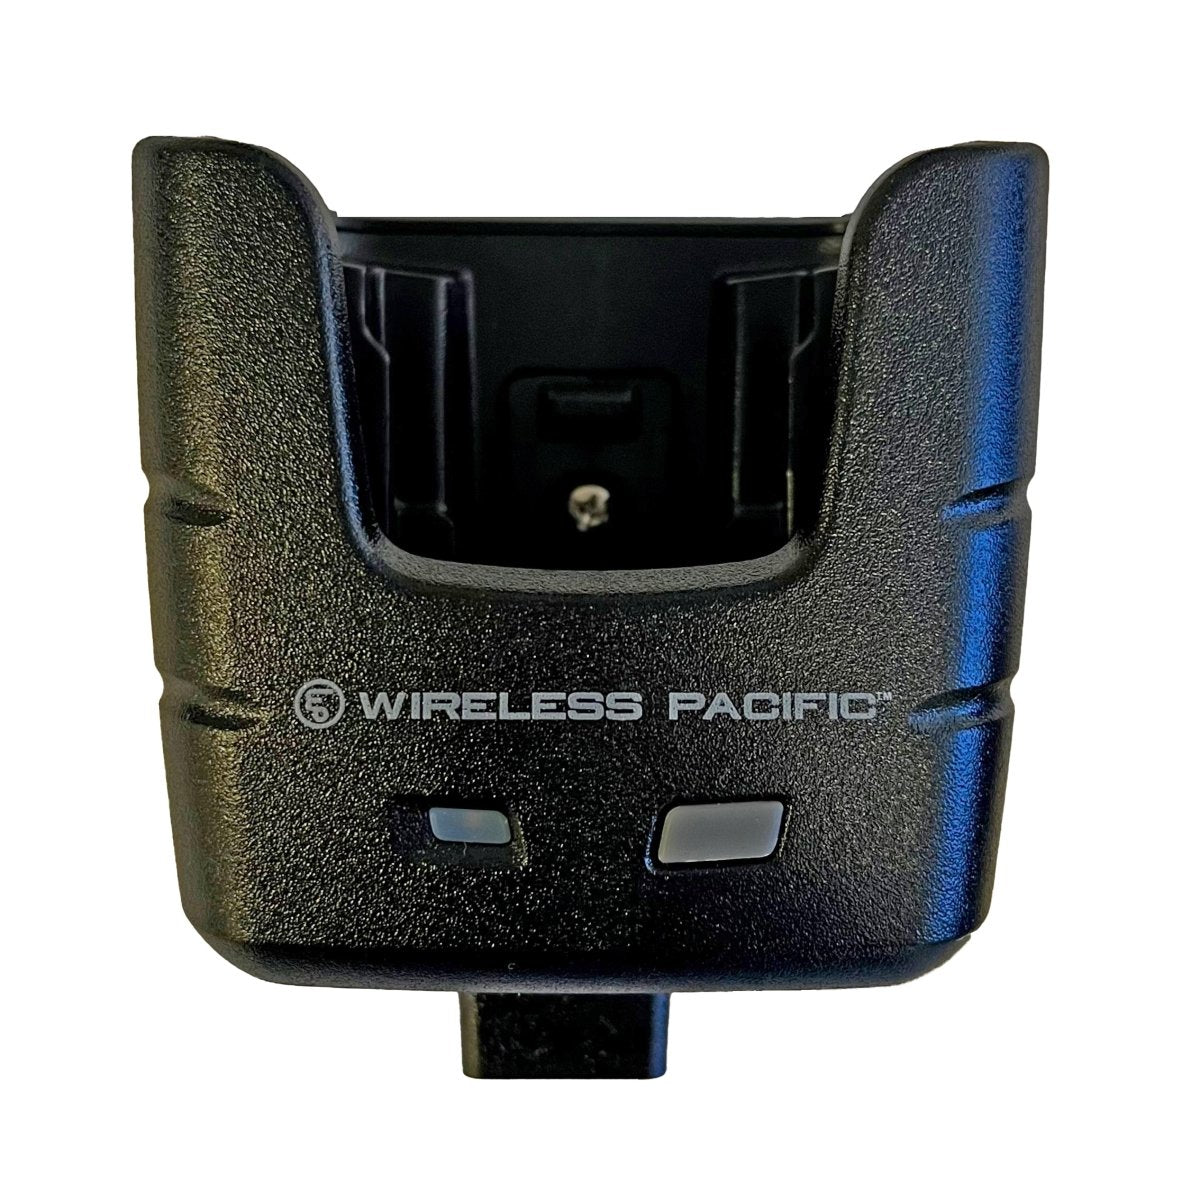 X10DR Mobile Vehicle Mount Charger. Model: XMVC-Wireless Pacific-XMVC